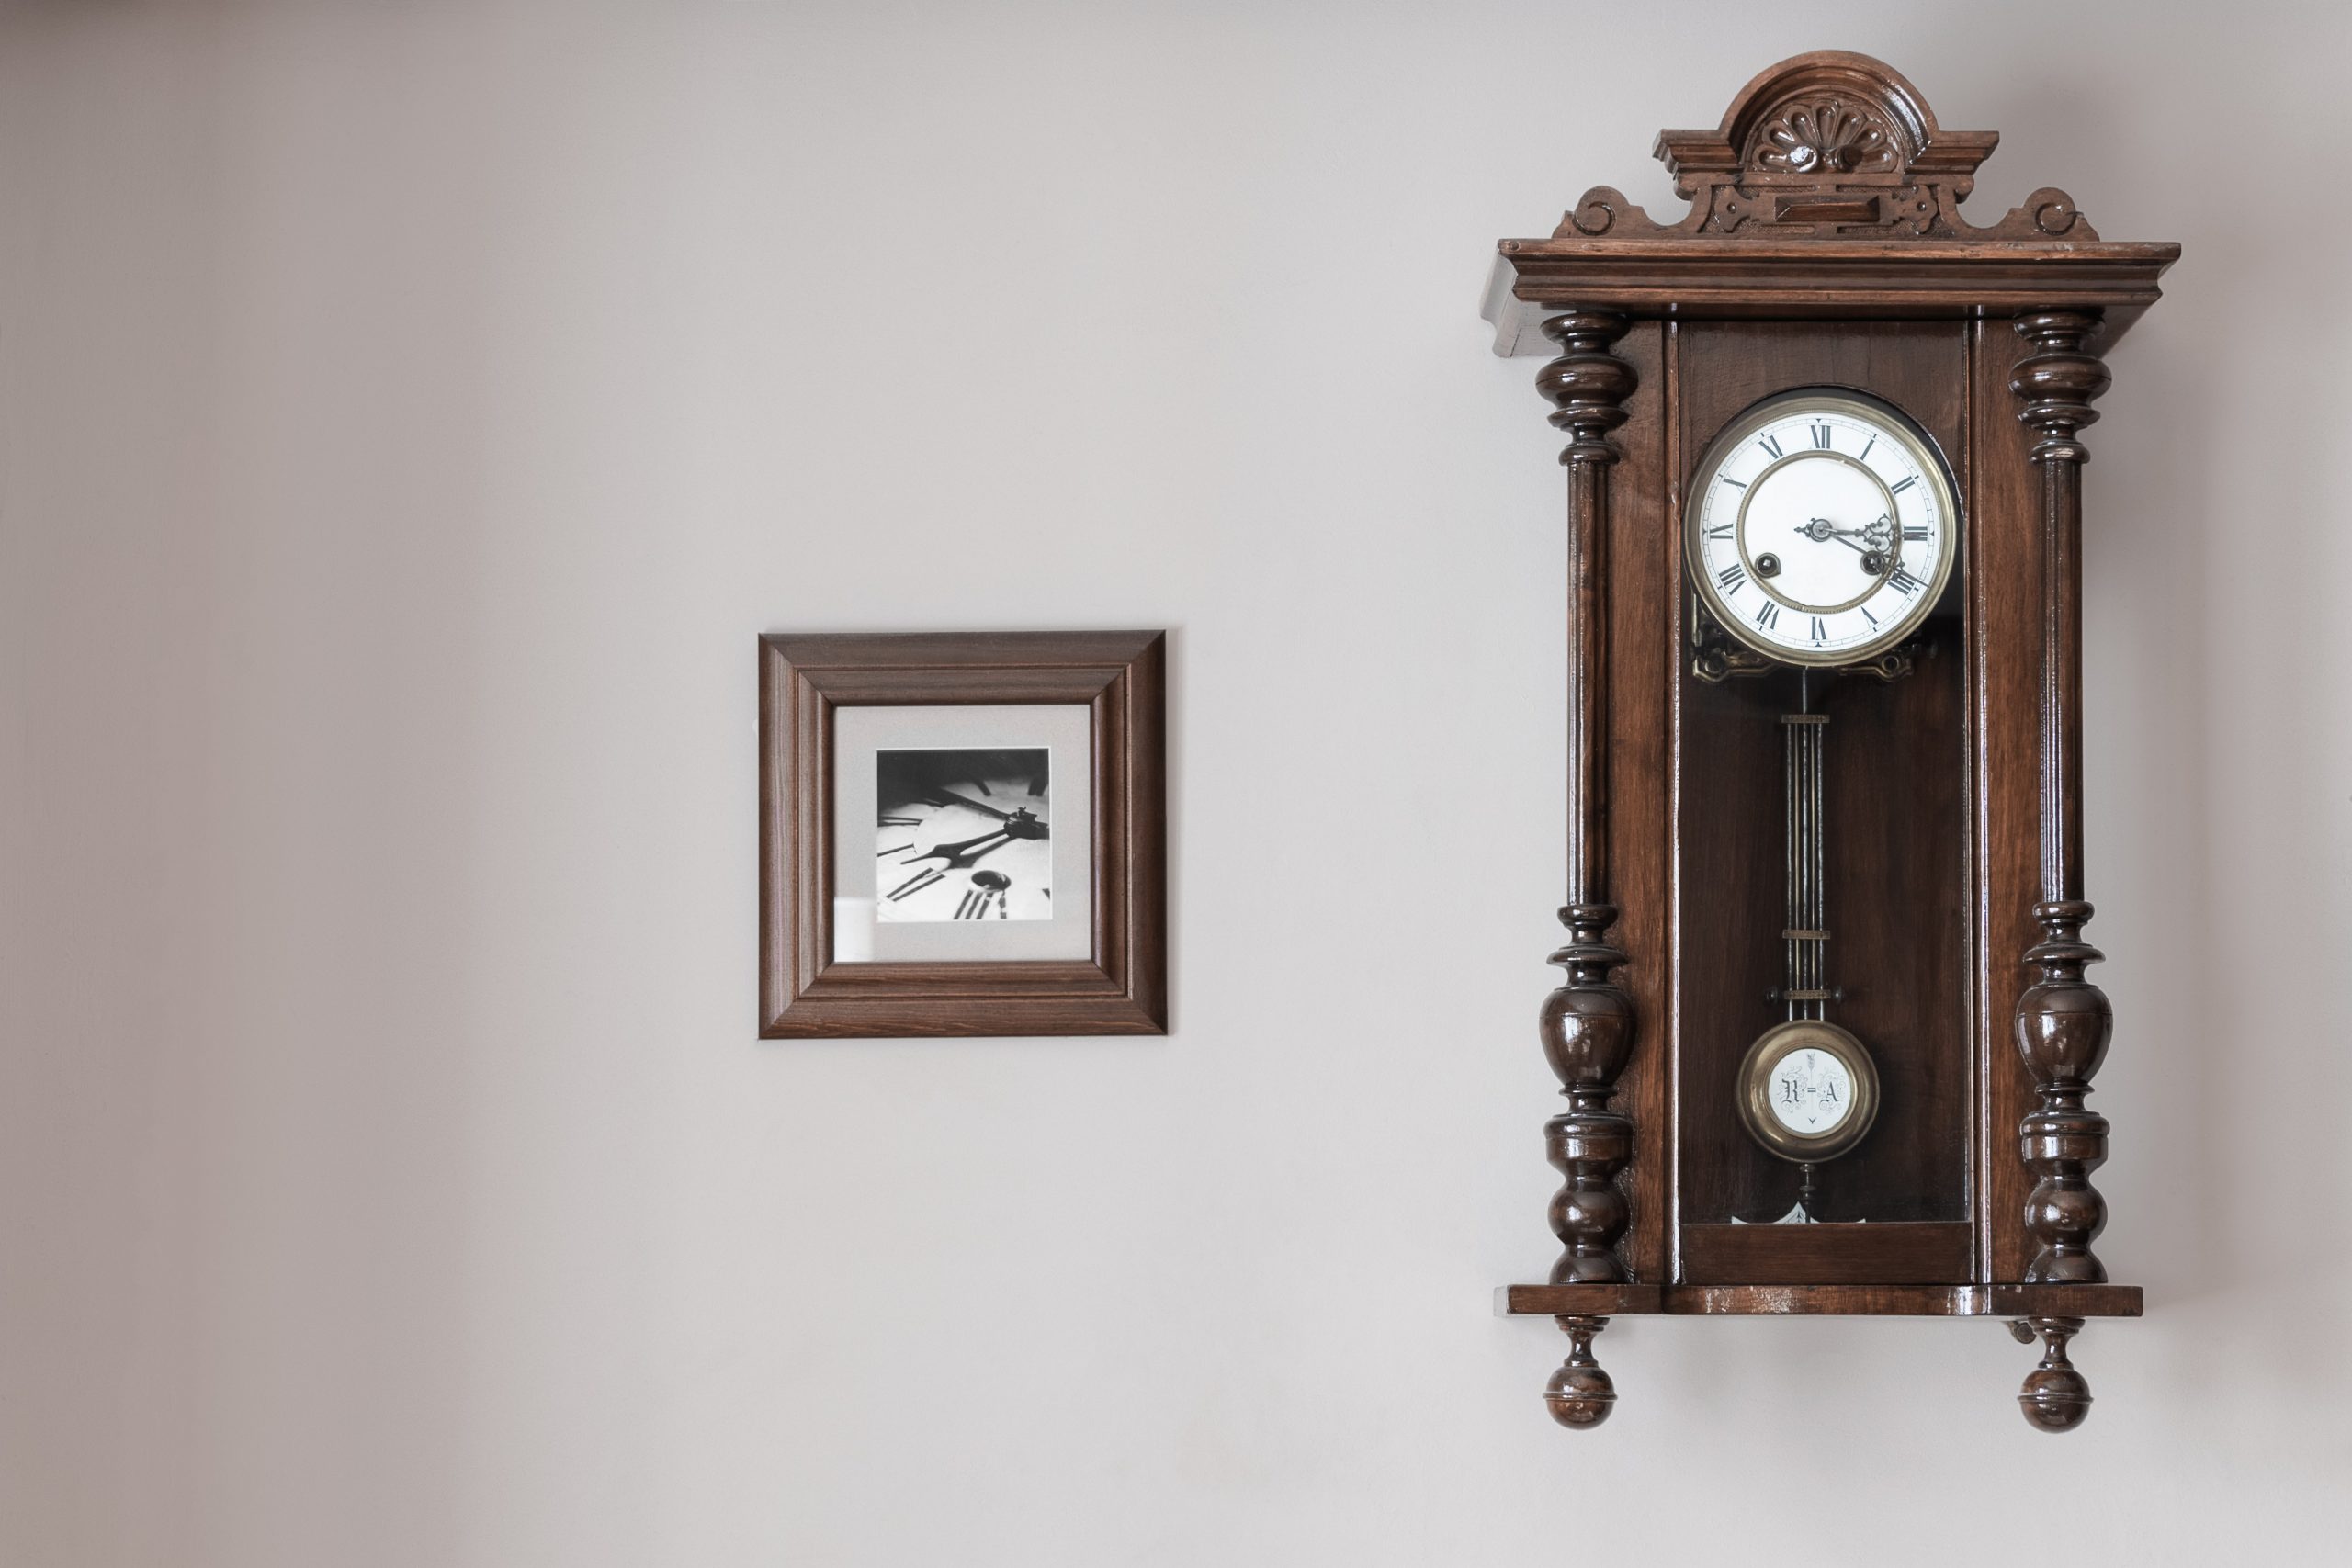 types of clocks for home decor